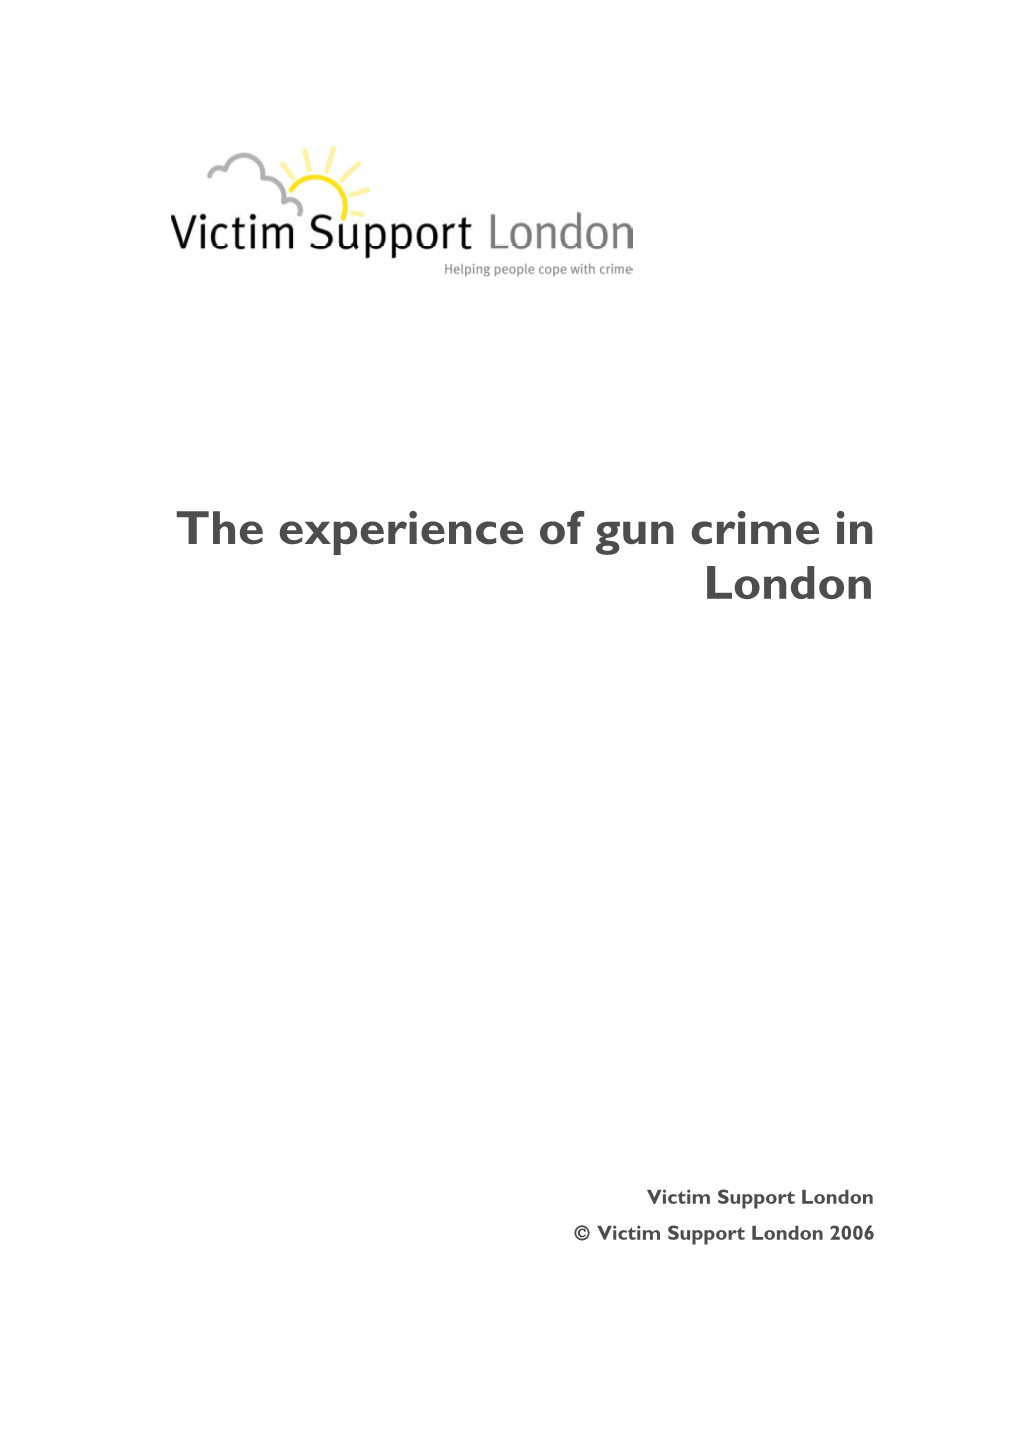 The Experience of Gun Crime in London